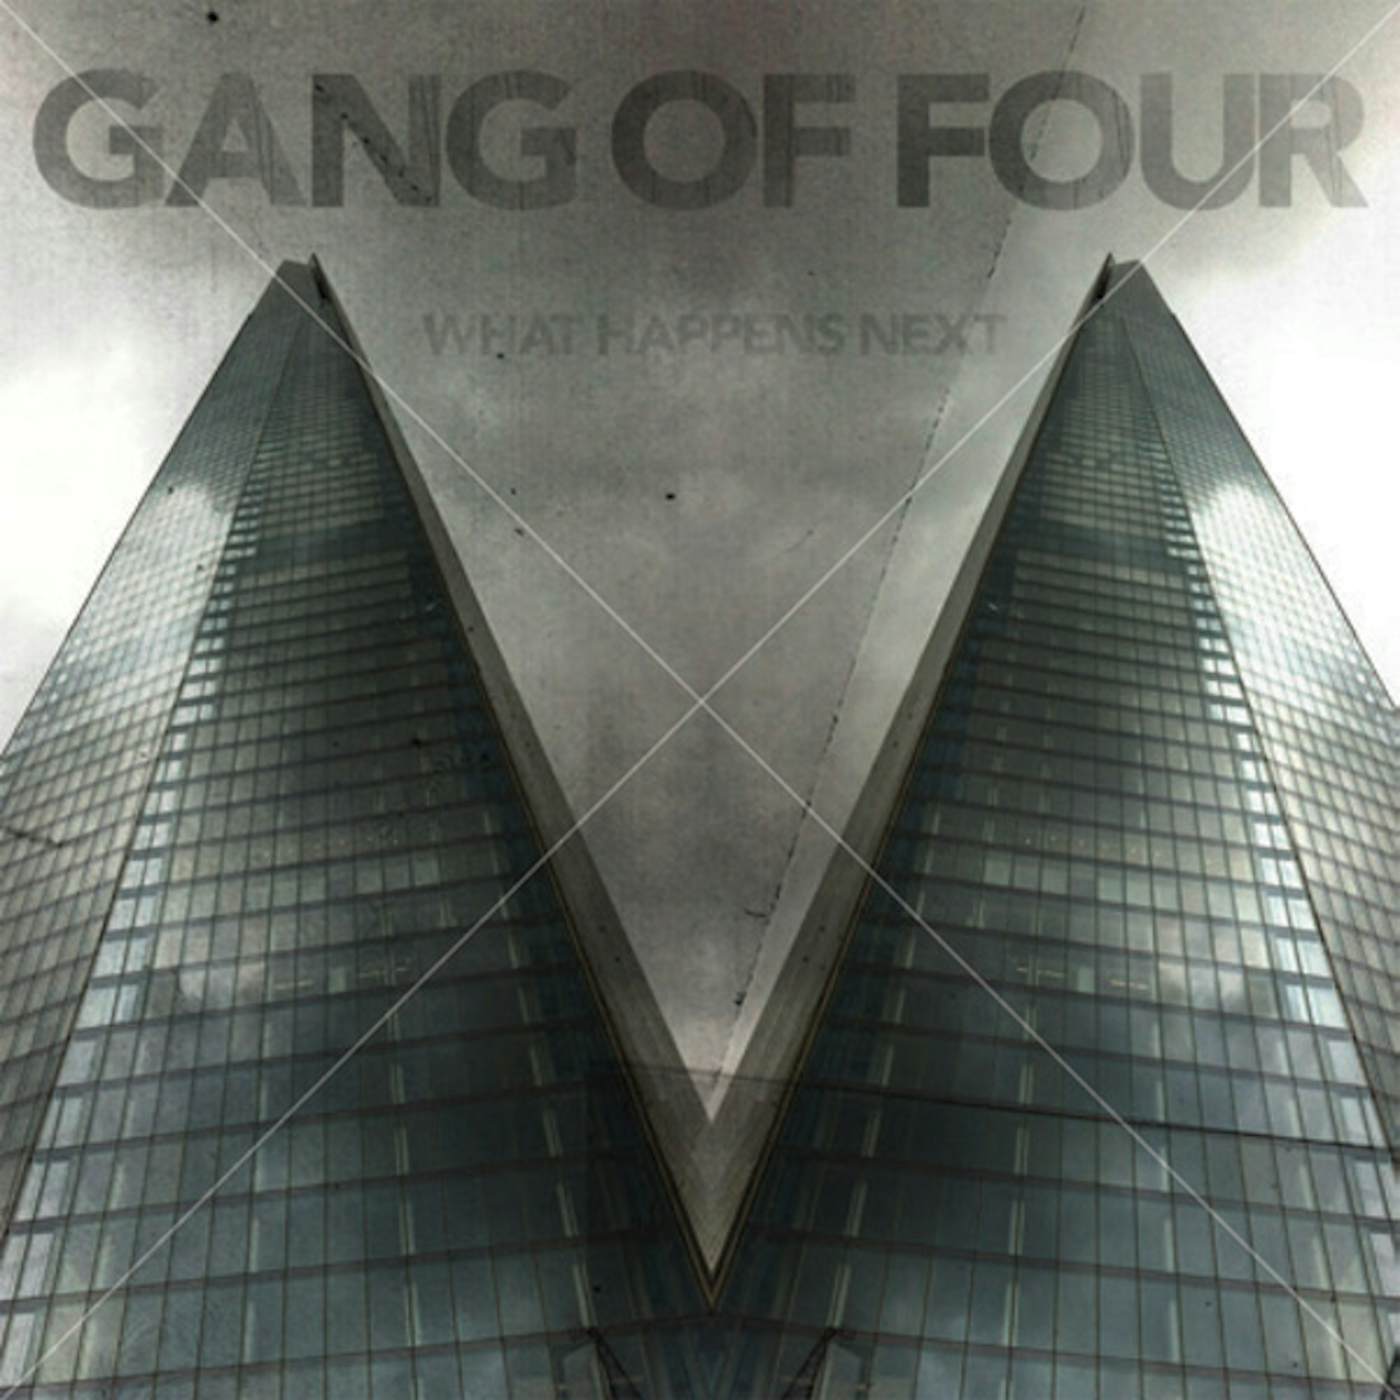 Gang Of Four WHAT HAPPENS NEXT CD